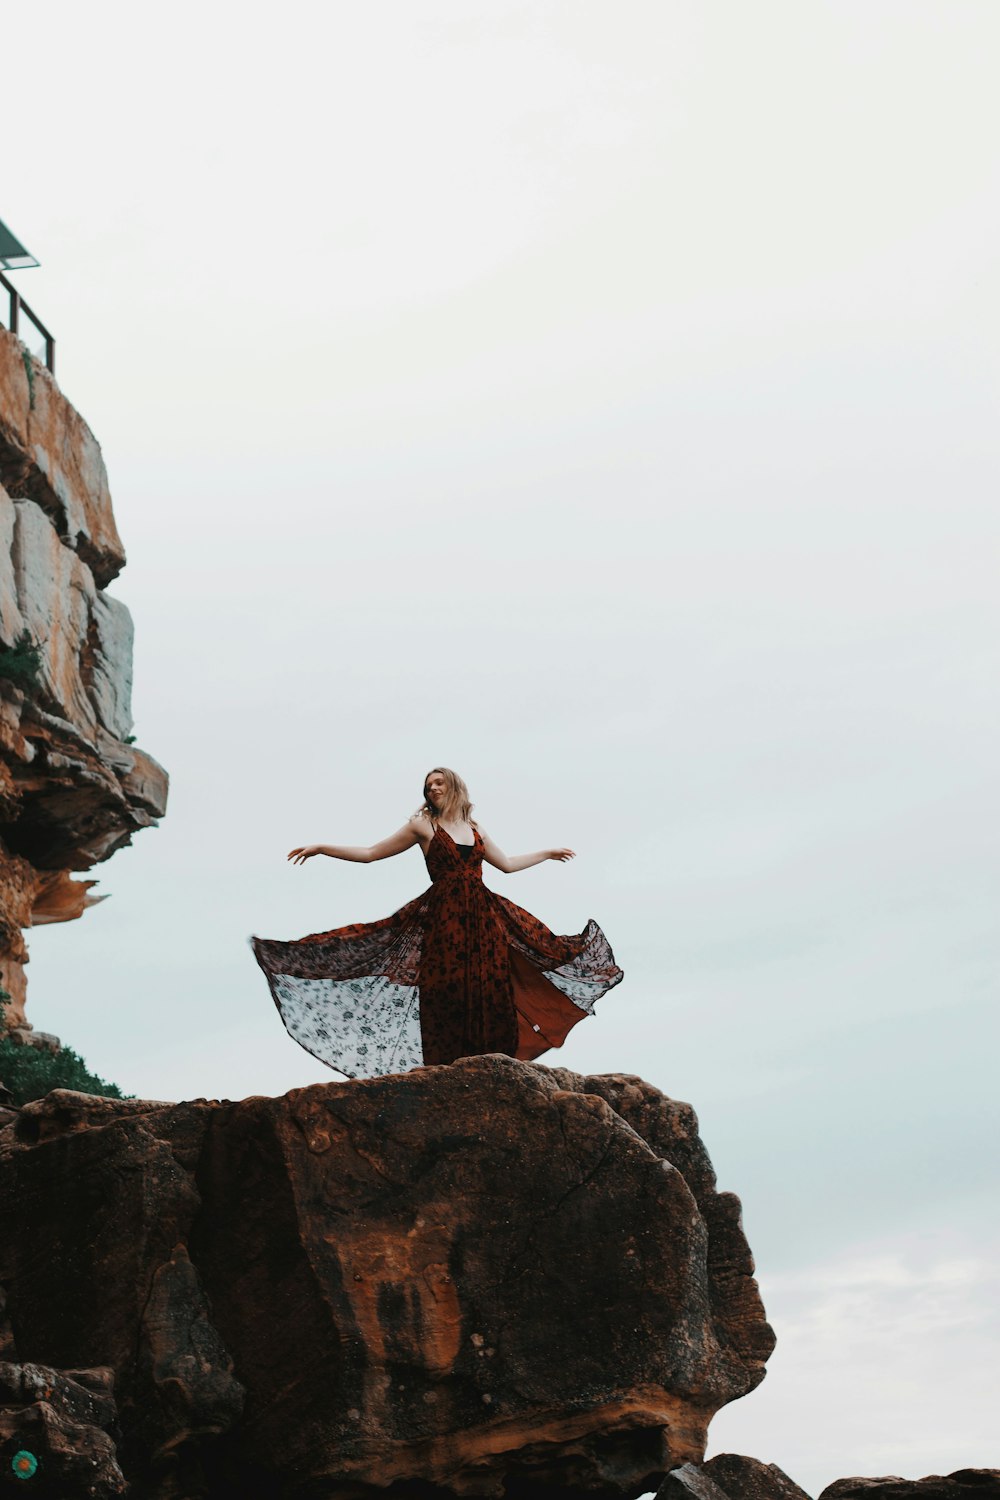 woman in black dress standing on rock formation during daytime